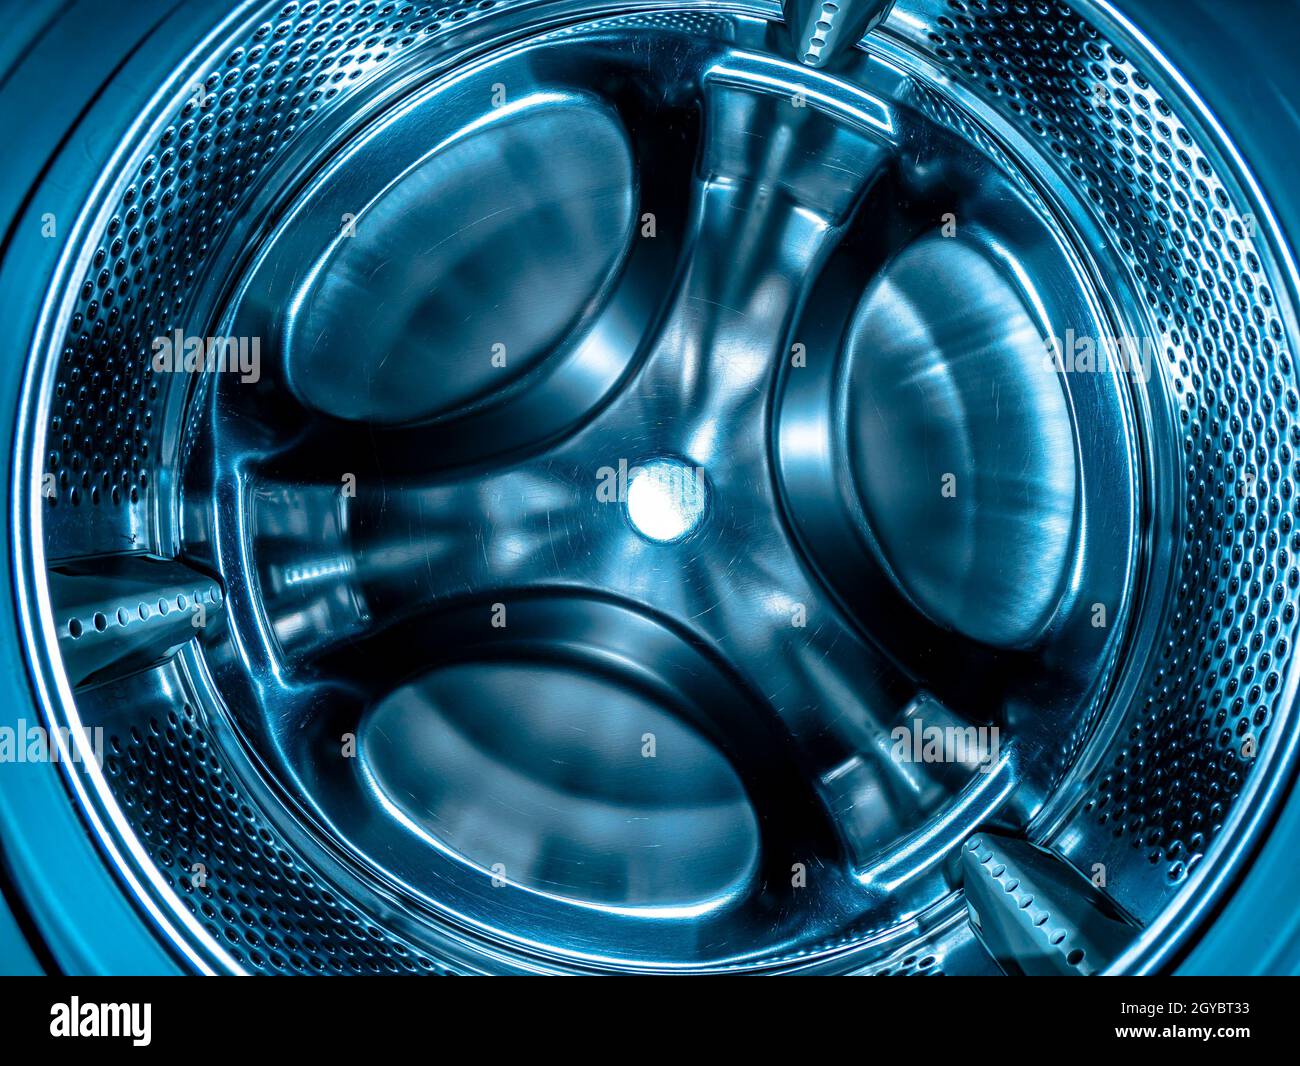 Metal drum of the washing machine made of stainless steel. Stainless steel  tank. Washing machine repair service. Household appliances repair workshop  Stock Photo - Alamy